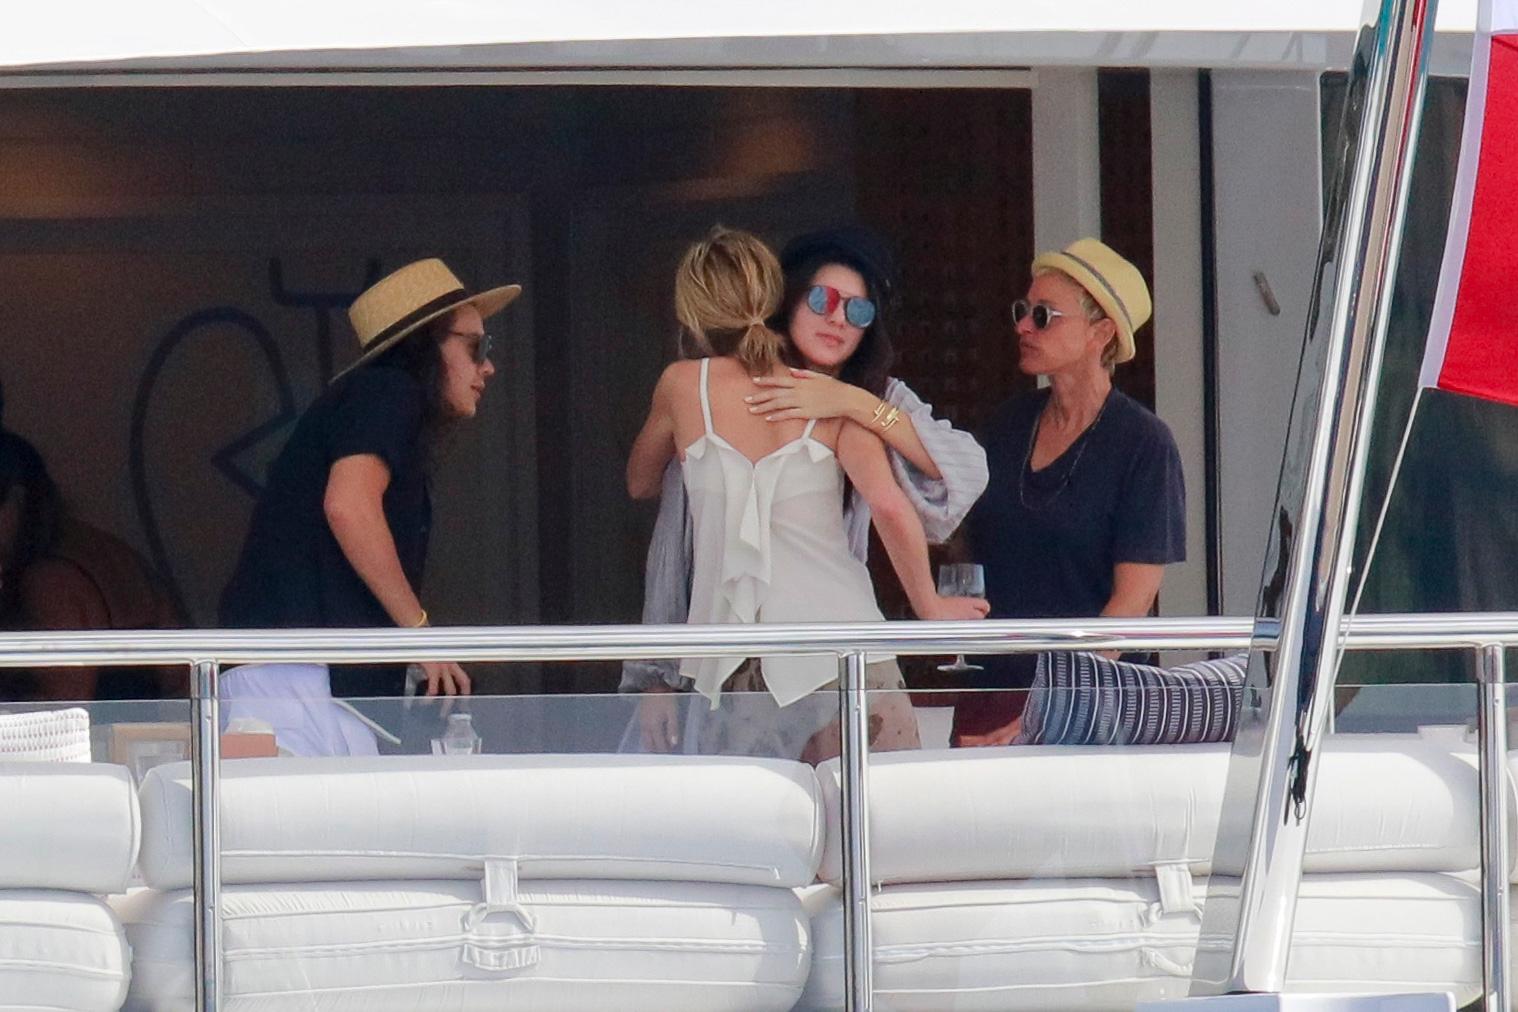 Kendall Jenner And Harry Styles Lunch Together With Ellen Degeneres And Portia De Rossi On Yacht